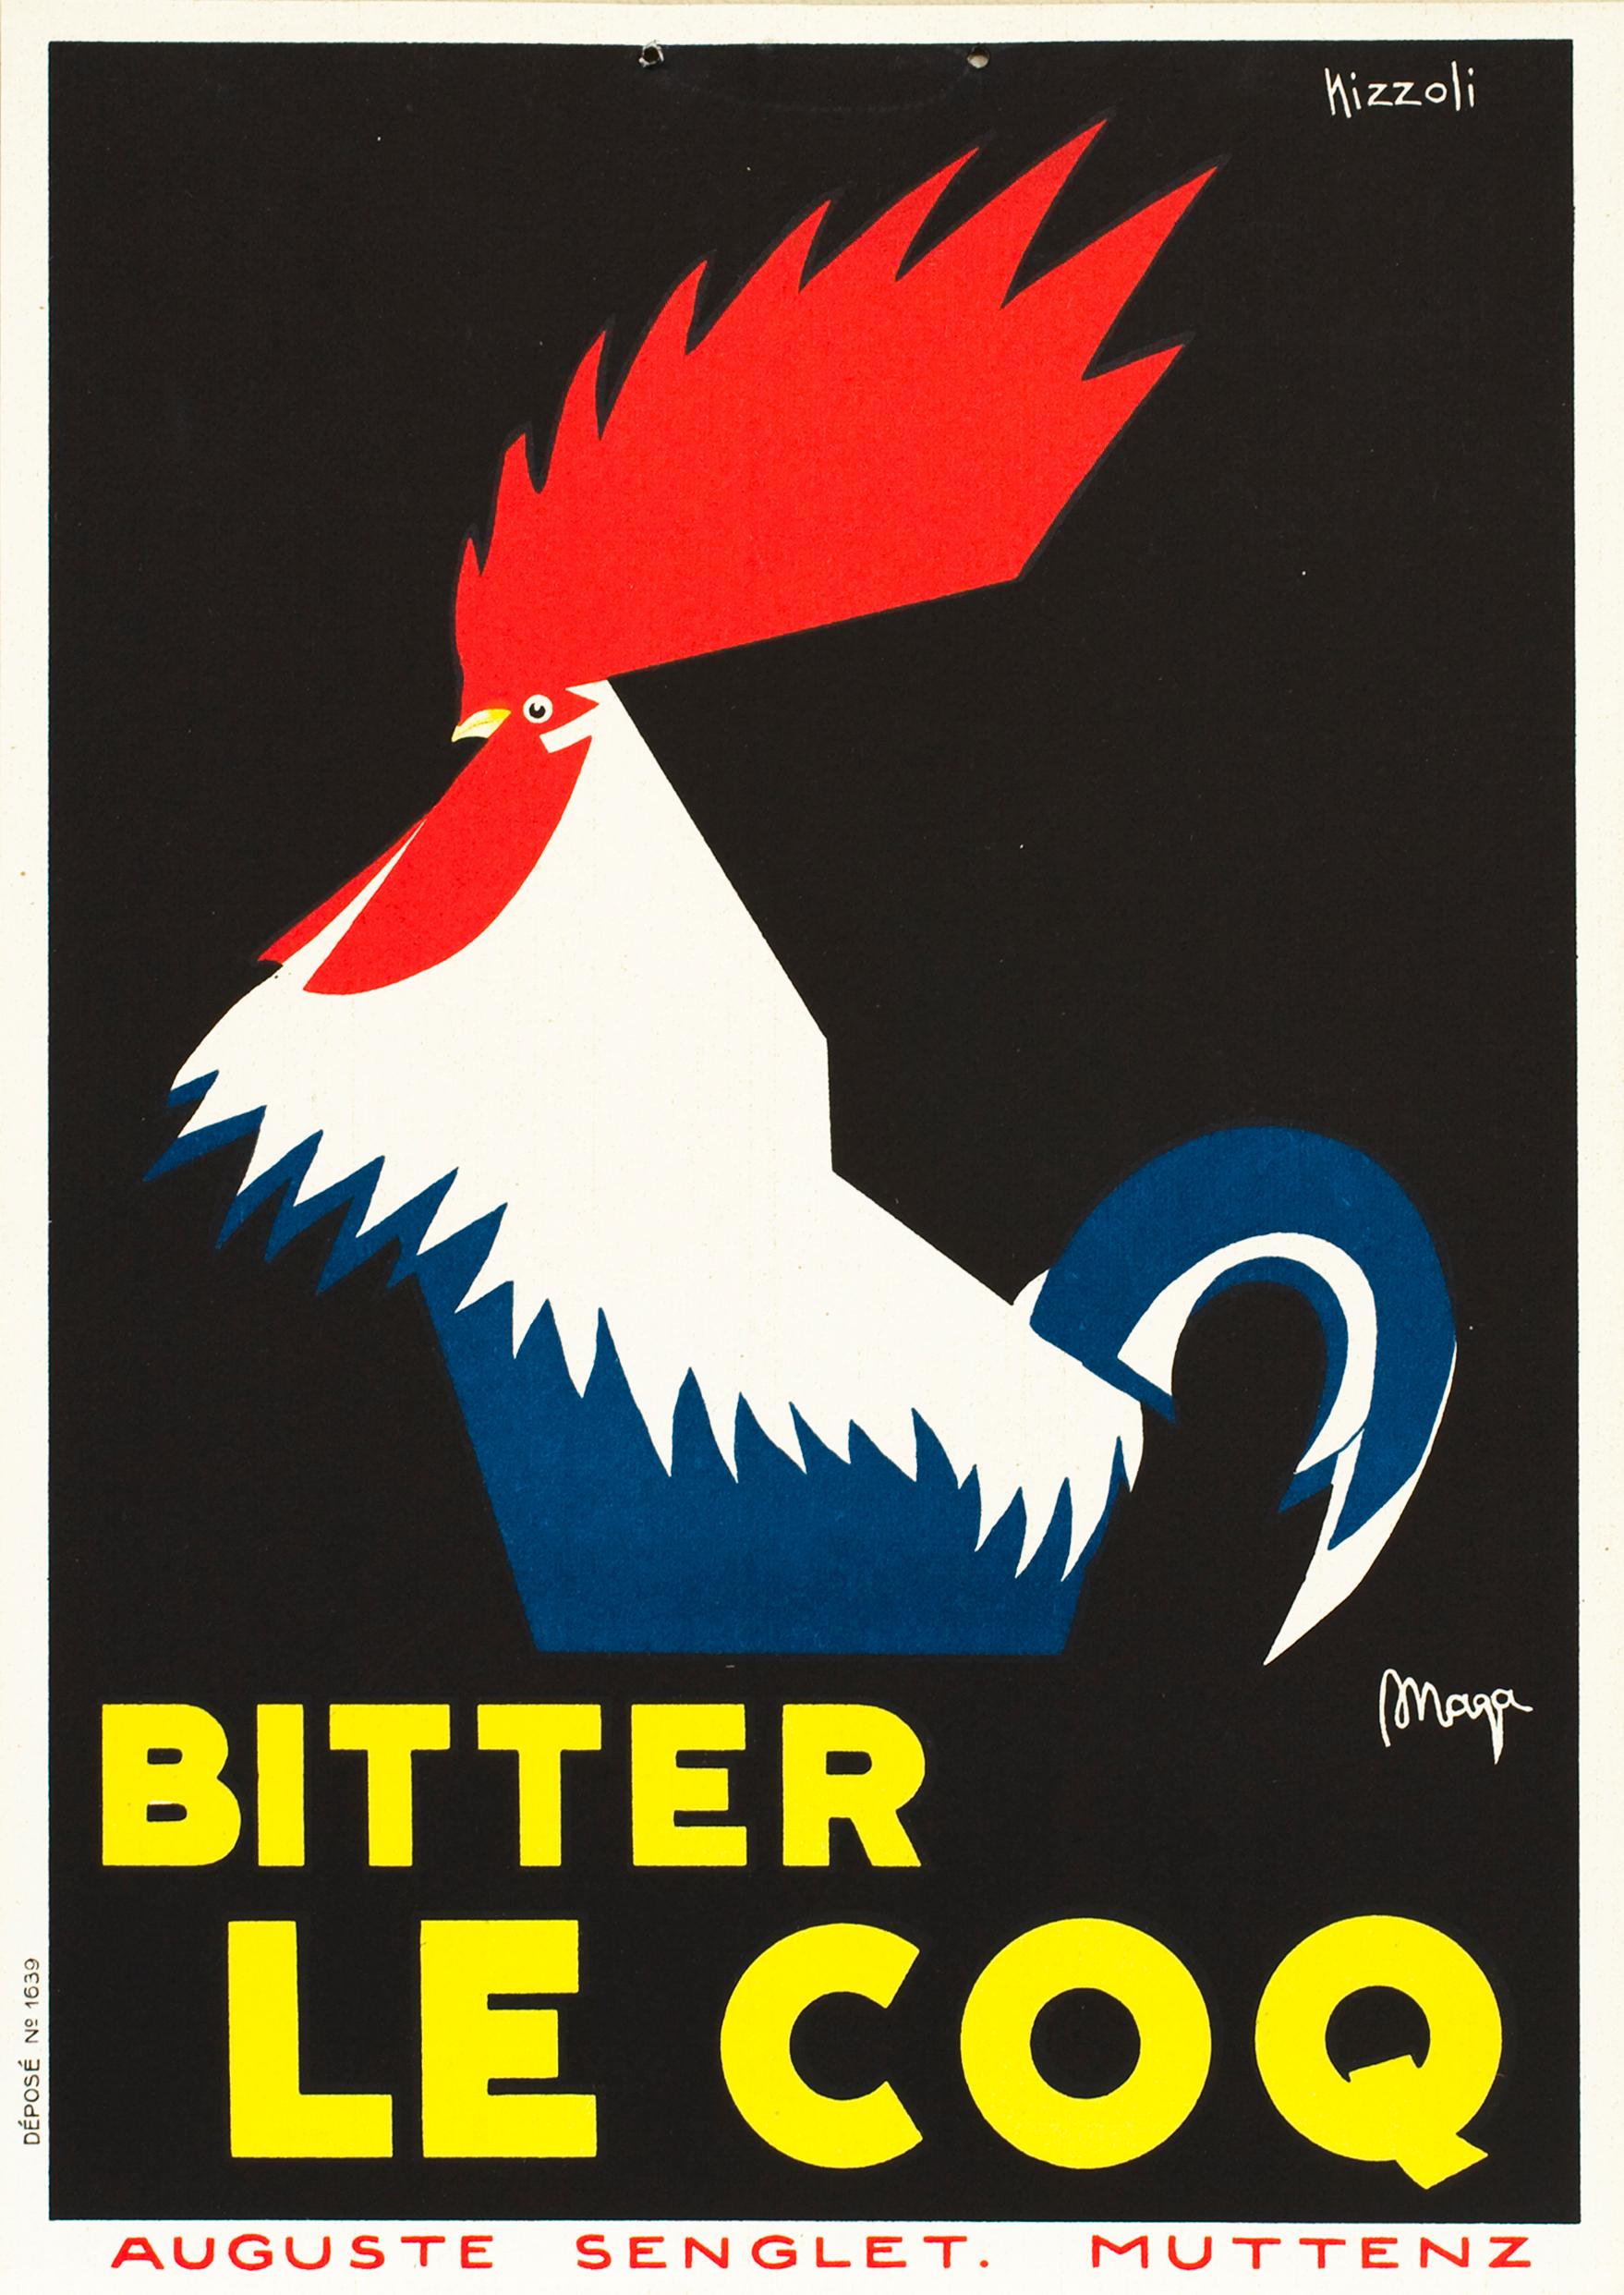 Bitter Le Coq Original Vintage In-Store Display - Print by Marcello Nizzoli